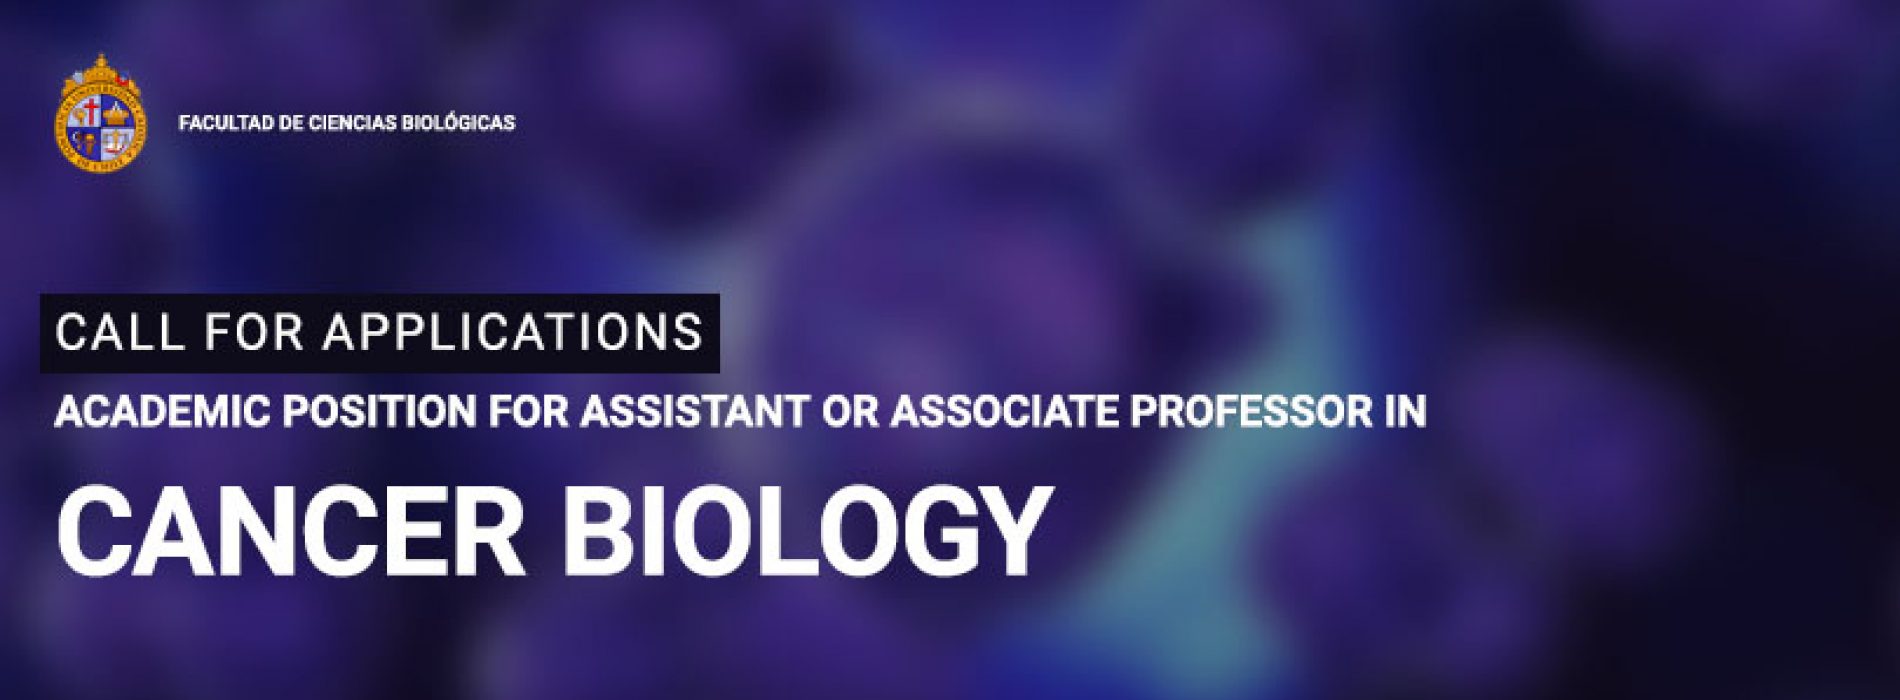 CALL FOR APPLICATIONS: ACADEMIC POSITION FOR ASSISTANT OR ASSOCIATE PROFESSOR IN CANCER BIOLOGY